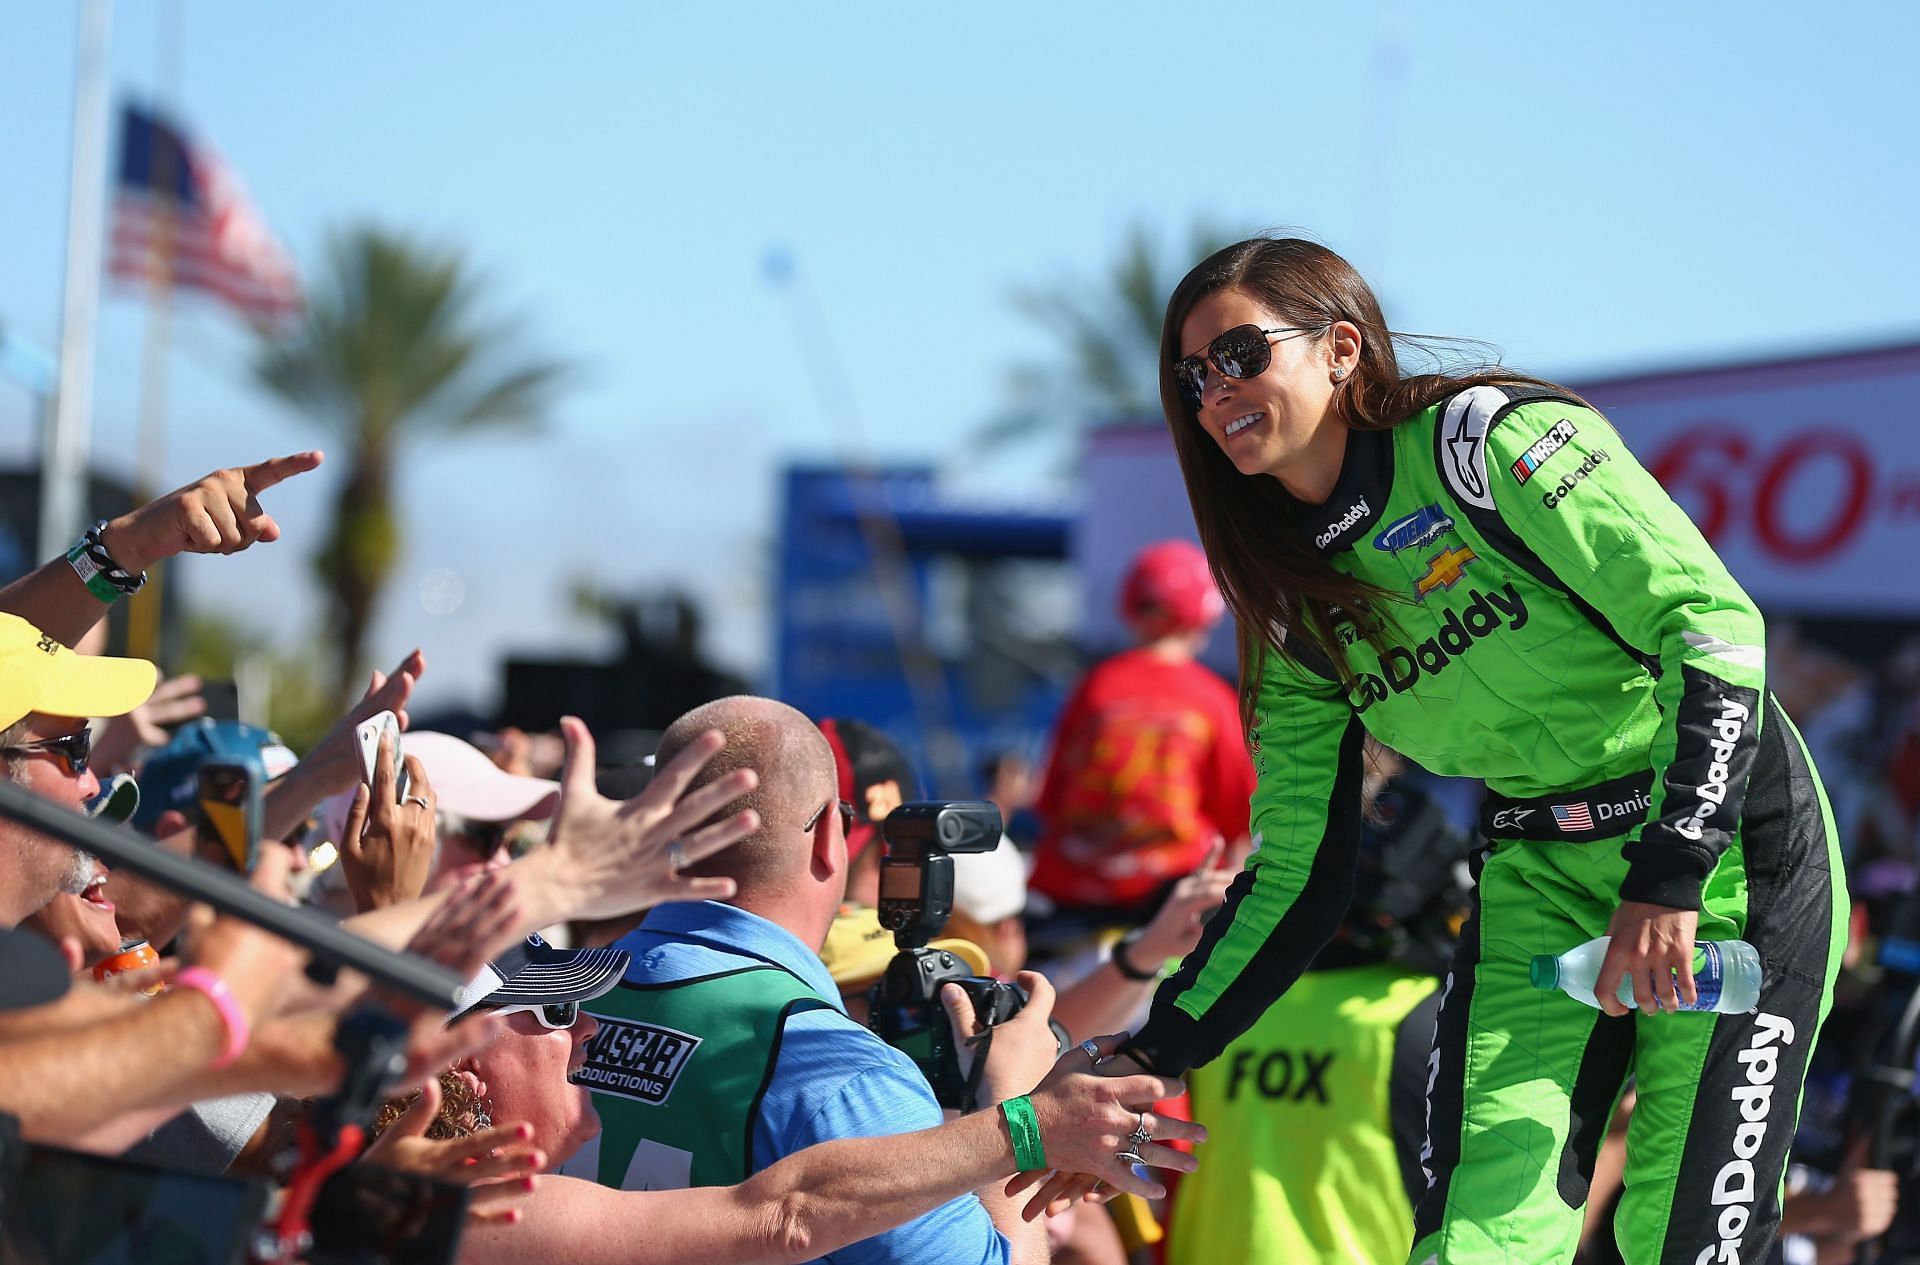 Danica Patrick is introduced during pre-race festivities before the start of the 2018 Monster Energy NASCAR Cup Series 60th Annual Daytona 500 at Daytona International Speedway in Daytona Beach, Florida. (Photo by Sarah Crabill/Getty Images)